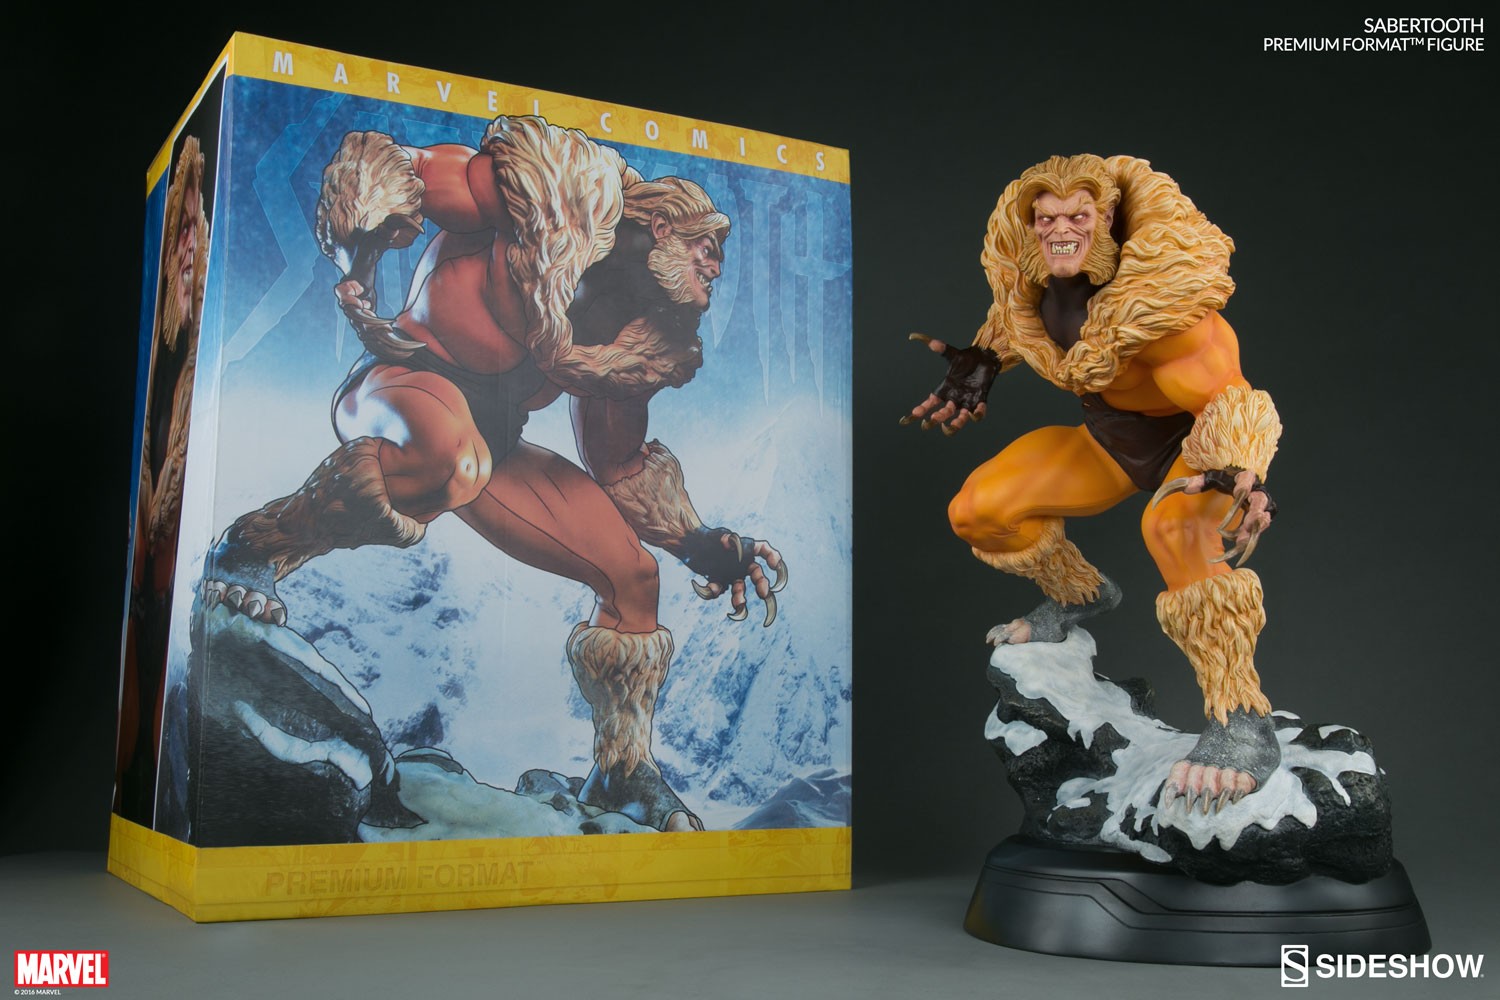 Sabretooth Classic Exclusive Edition View 6